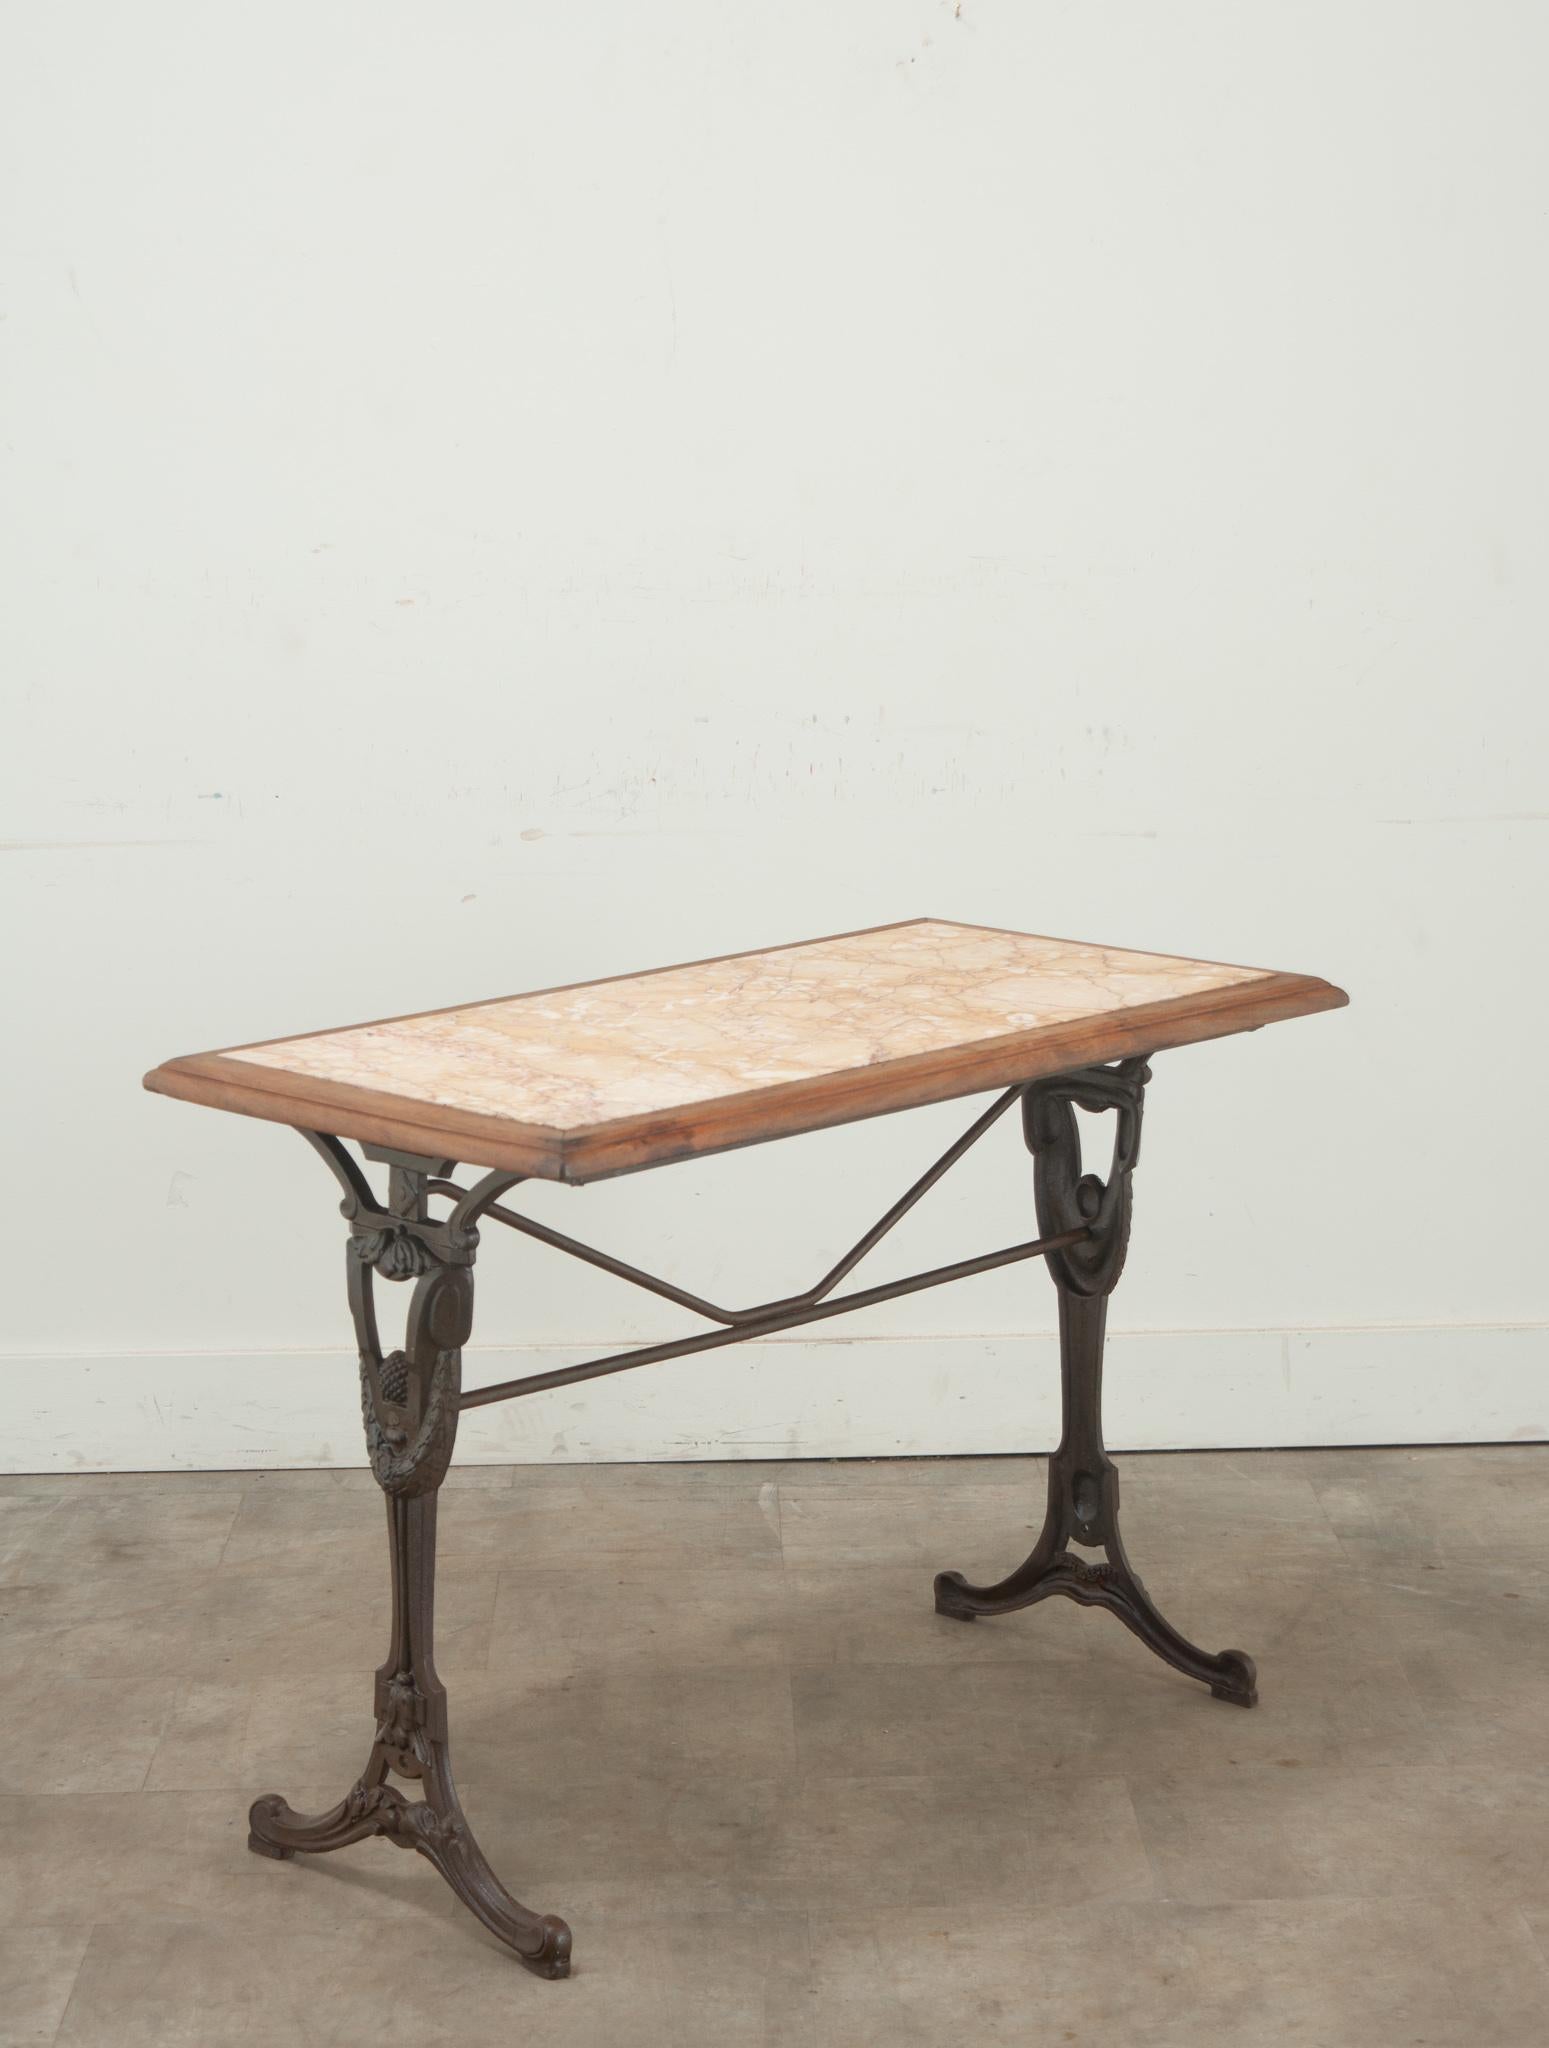 A classically styled French bistro table featuring a uniquely colored marble surrounded in a walnut frame. The top sits over a cast iron frame connected by a stretcher for additional support. There is wear consistent with age and use, be sure to